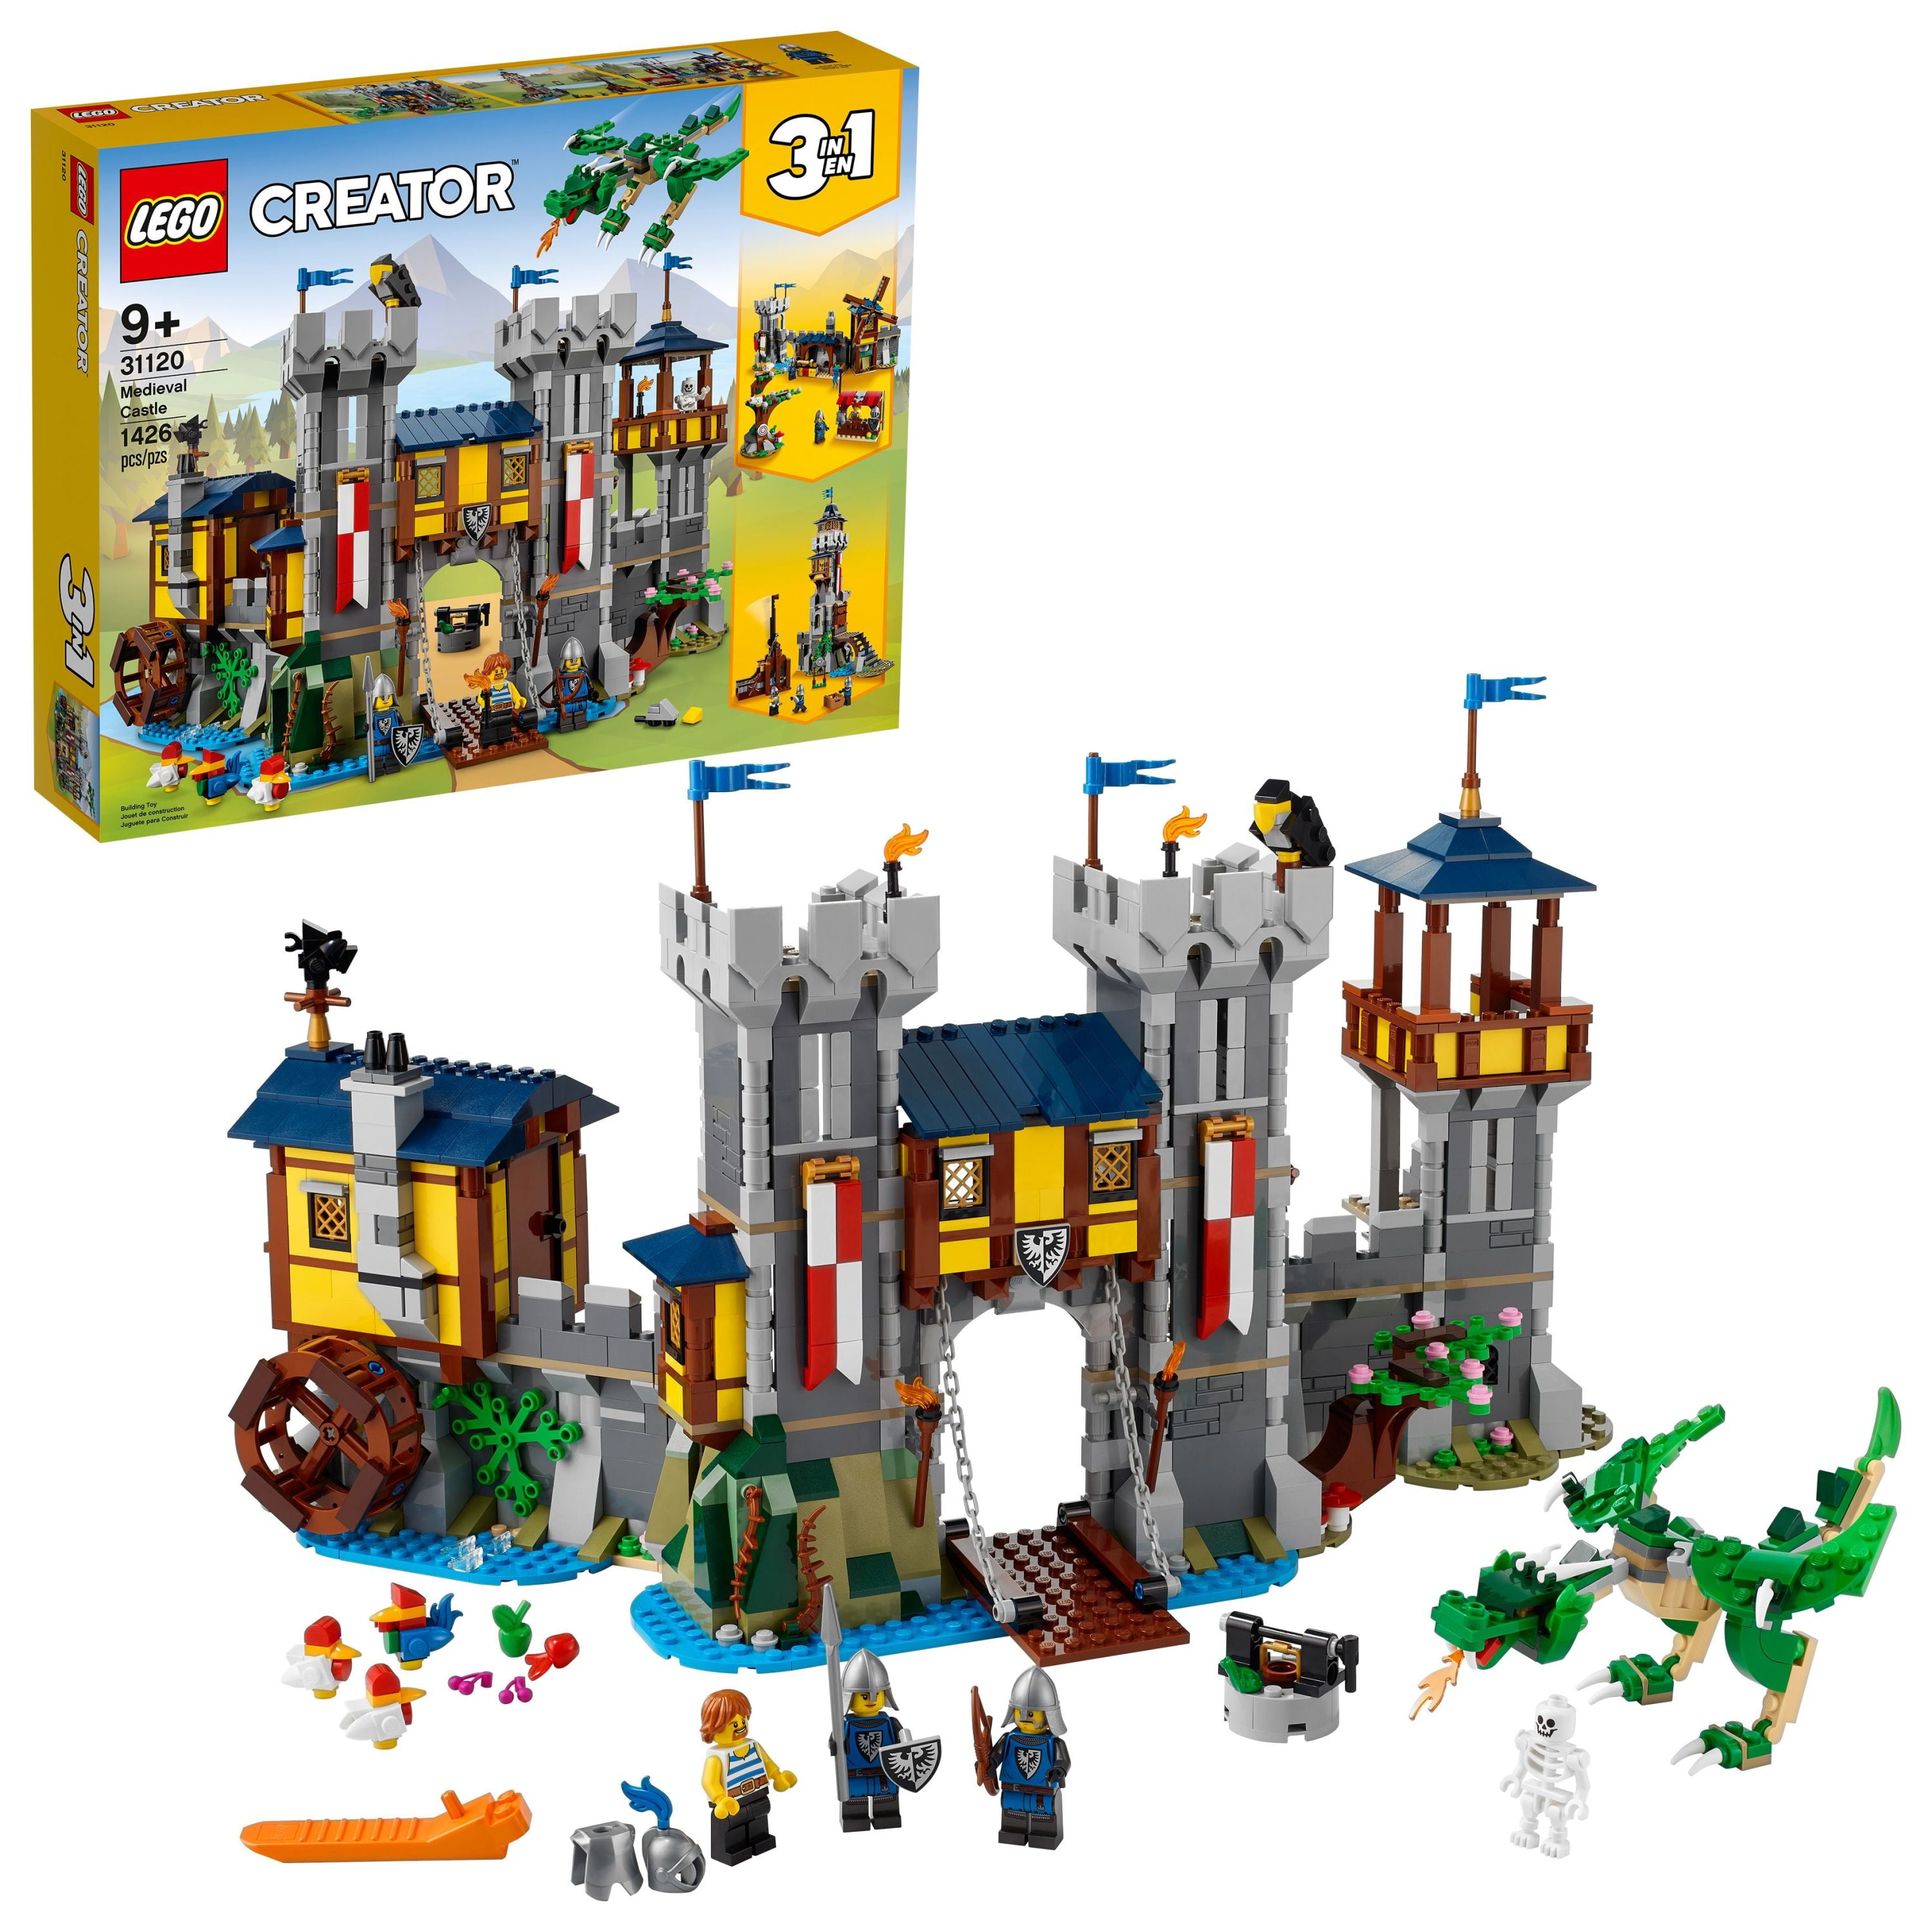 LEGO Creator 3in1 Castle Toy to Tower or Marketplace 31120, Skeleton, Dragon Figure, Minifigures and Catapult - Walmart.com